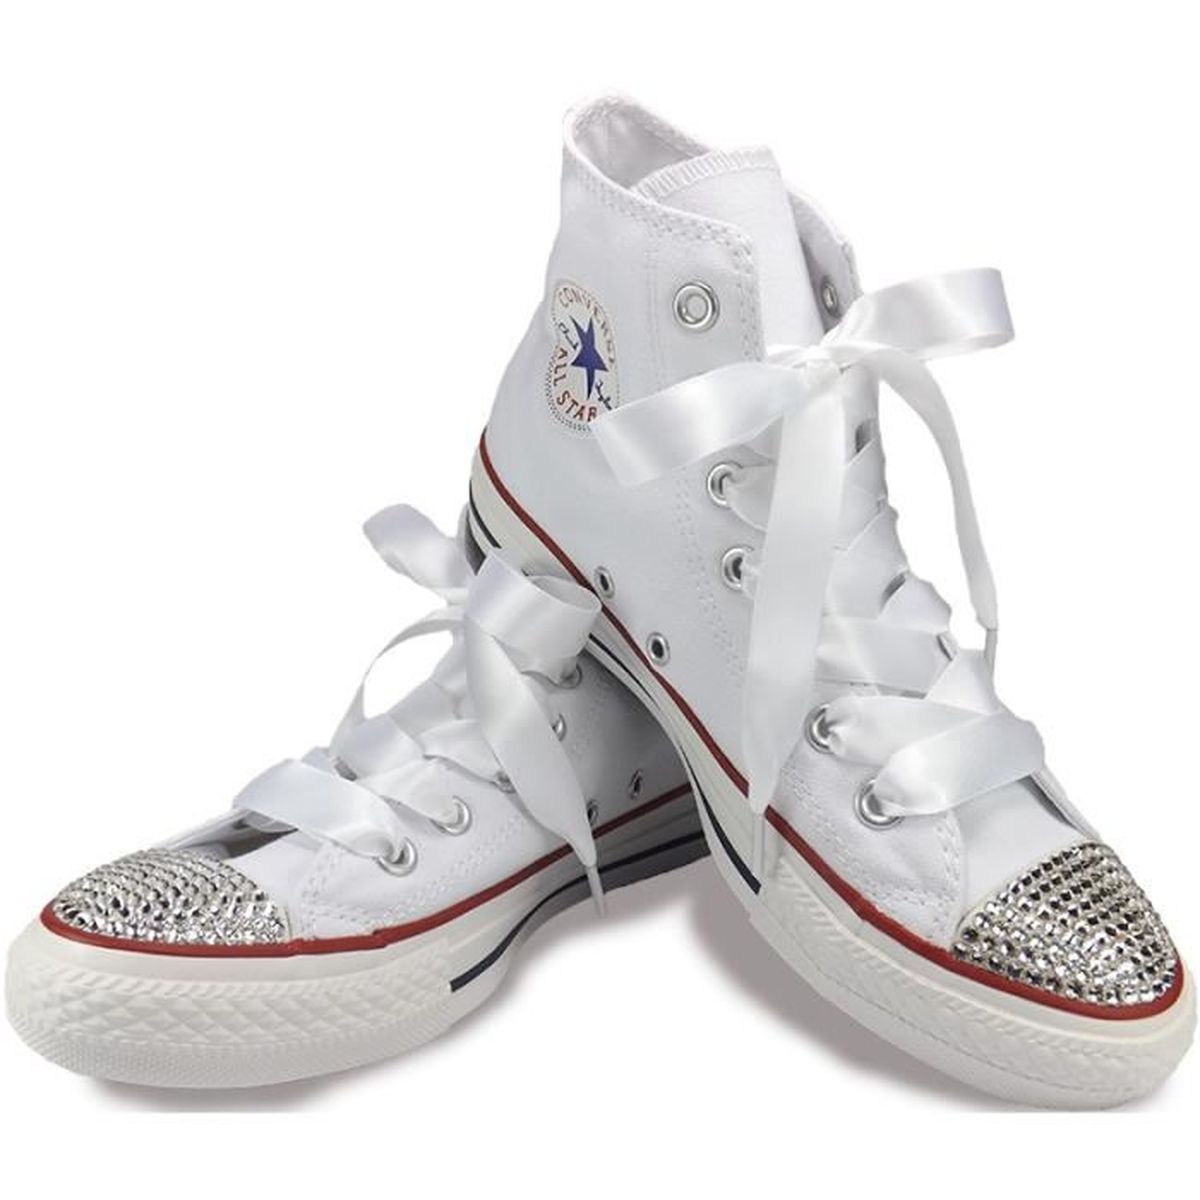 142cm White Satin Ribbon Shoelaces for Converse Trainers Boots & More Blanc  White - Cdiscount